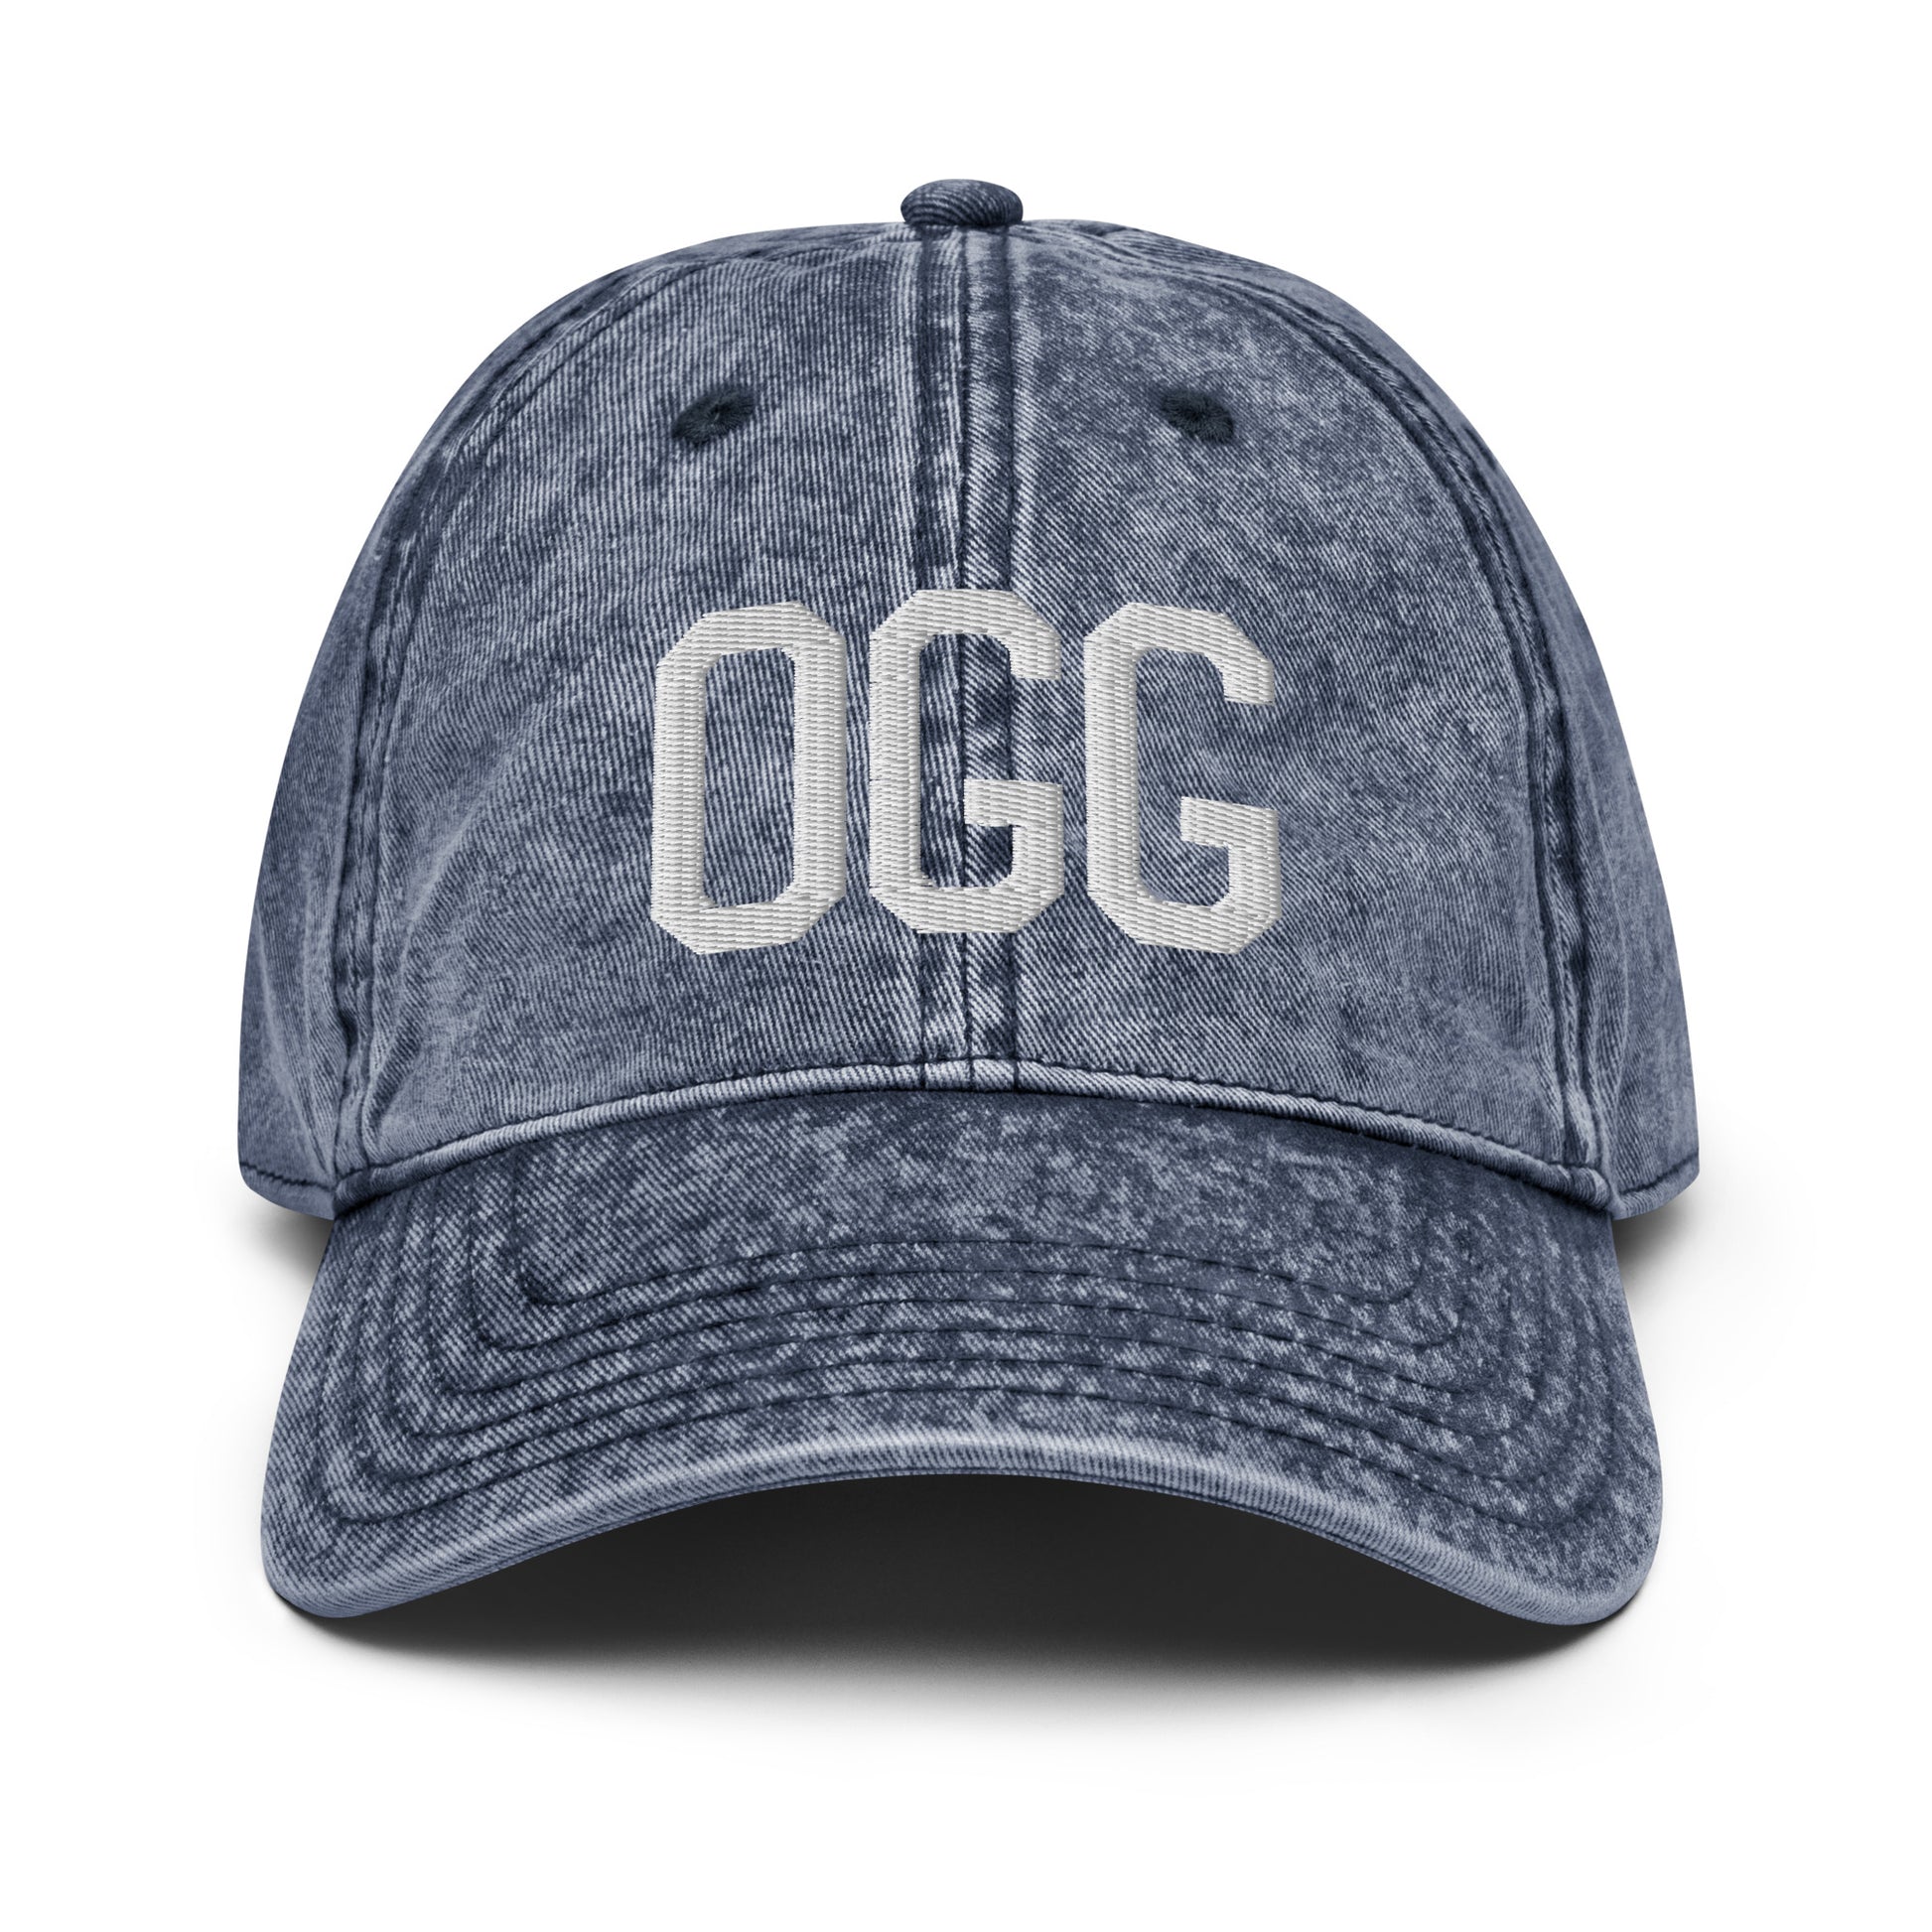 Airport Code Twill Cap - White • OGG Maui • YHM Designs - Image 16